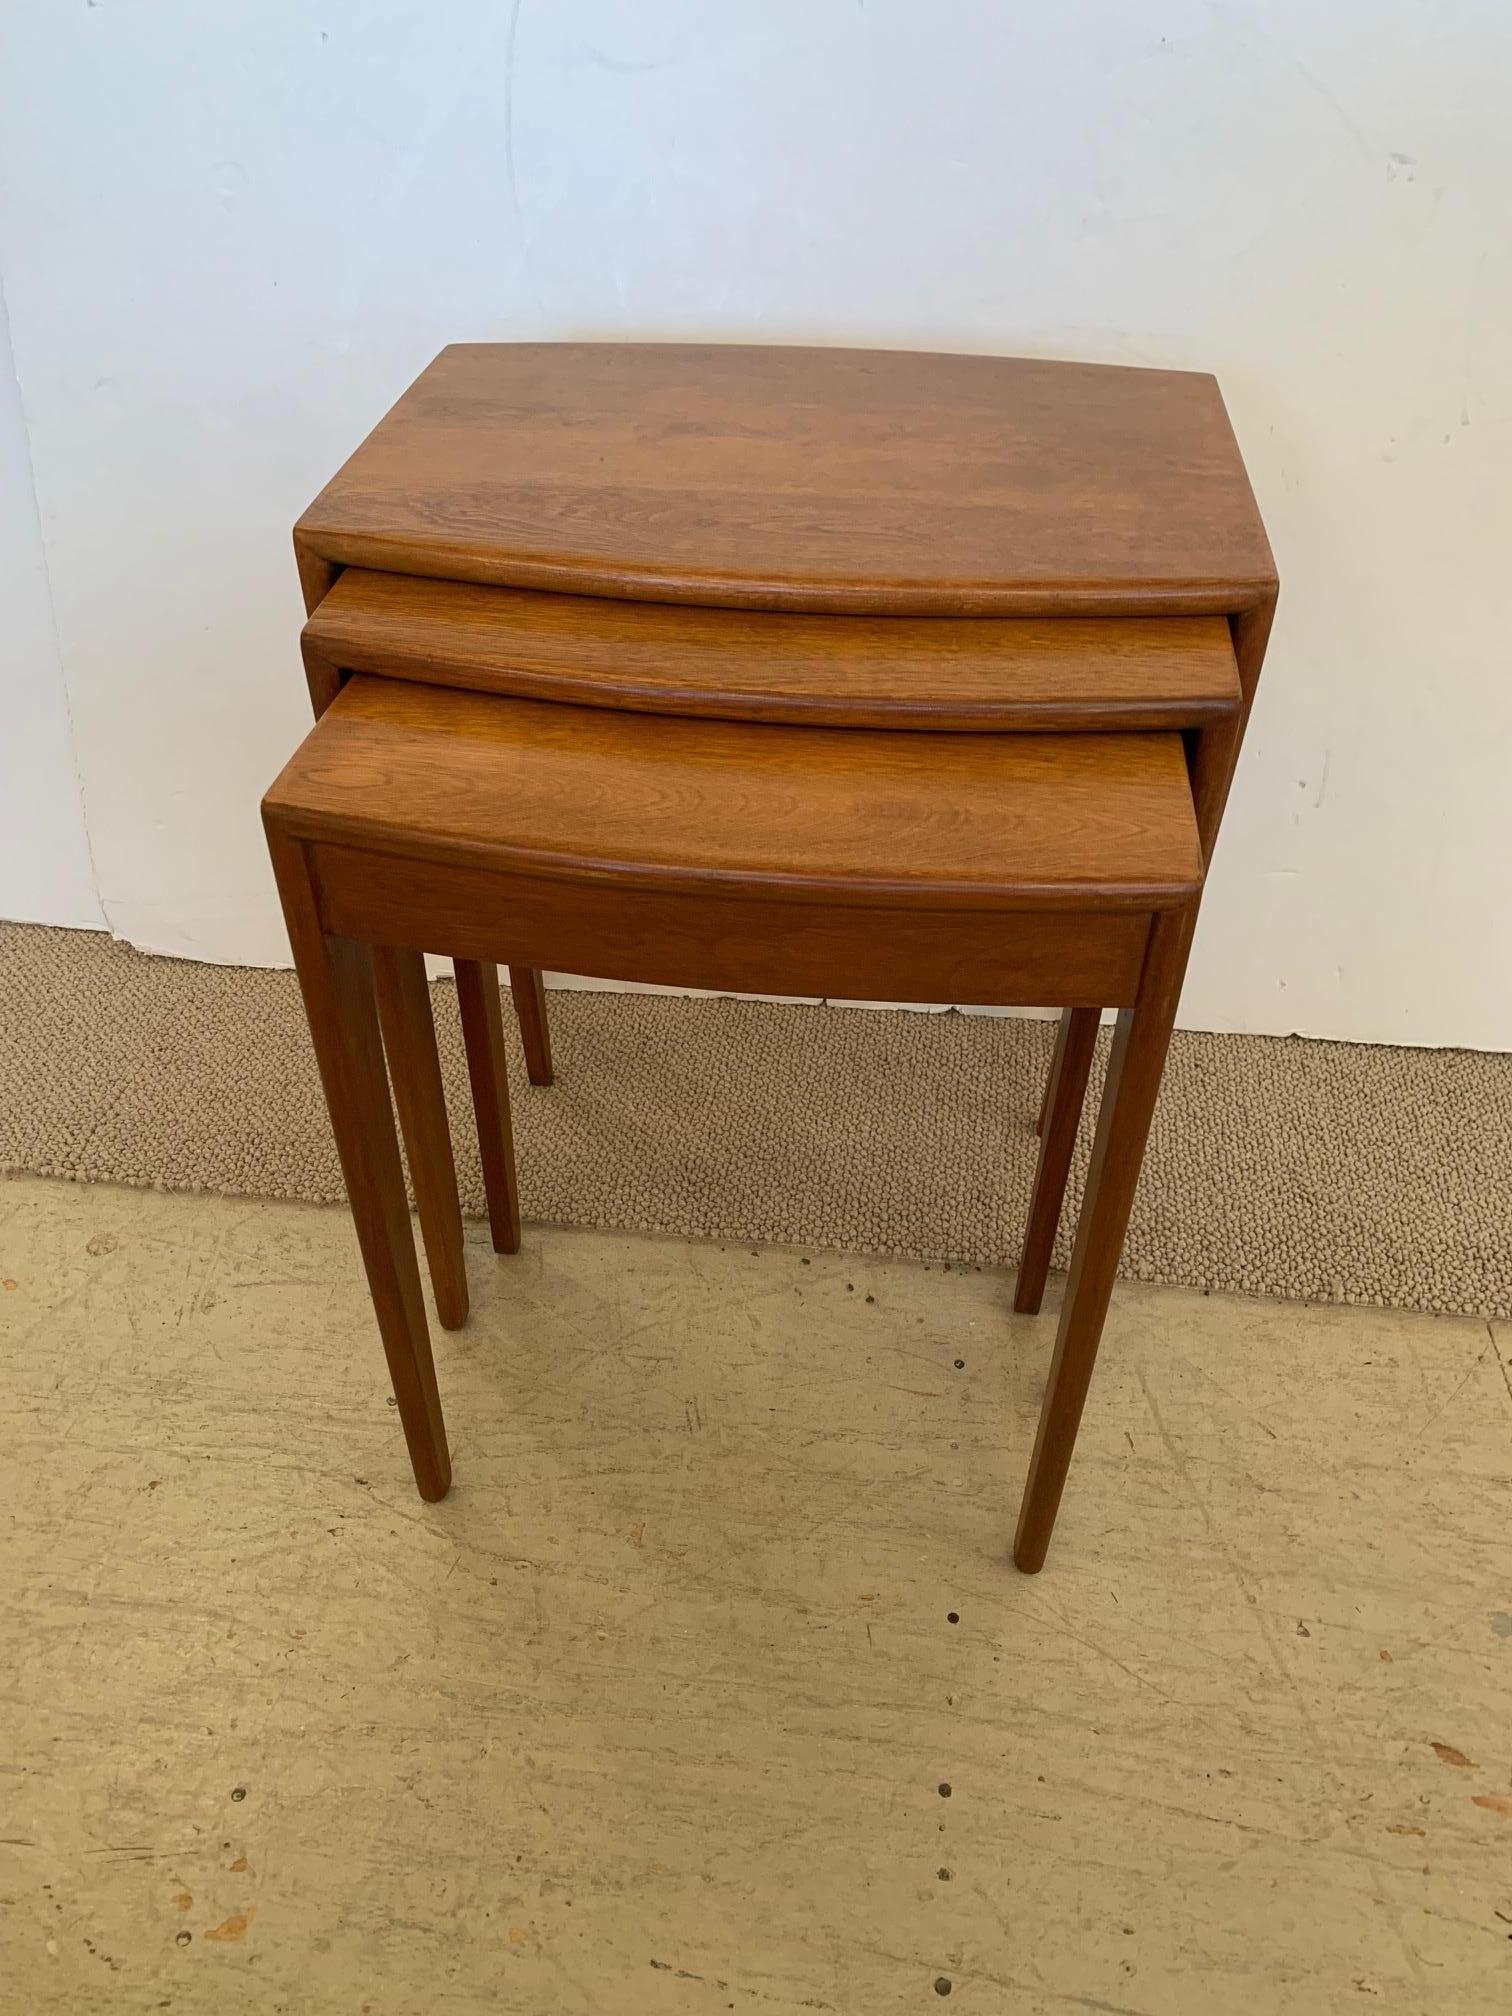 Sophisticated and versatile set of 3 Mid-Century Modern maple nesting tables with a sleek Milo Baughman-esque vibe.
Large table 24.75” H x 15” D x 21” W
Medium table23.25” H x 13.5” D x 19” W
Small table 22.25” H x 12” D x 17” W.